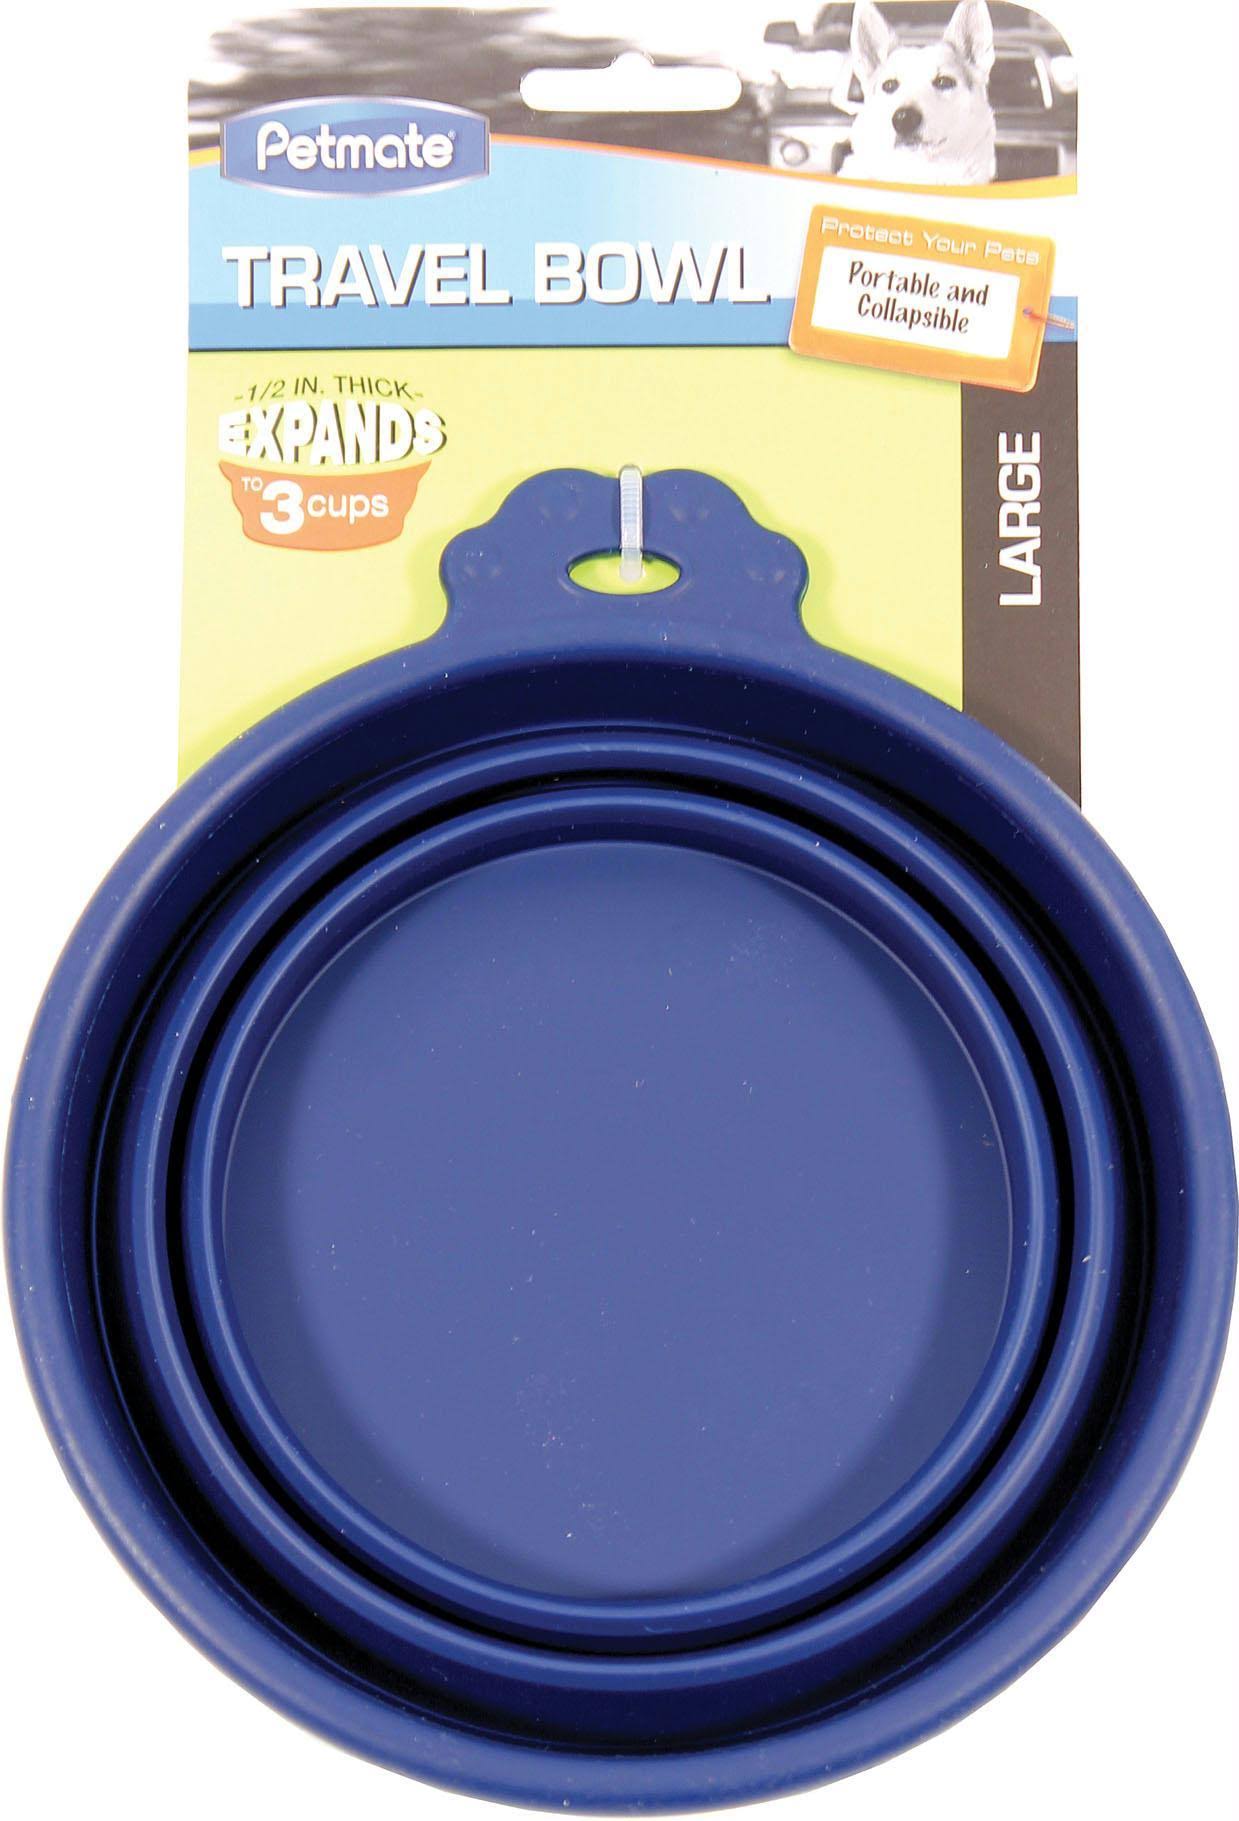 Petmate Silicone Round 3-Cup Travel Bowl for Pets - Navy Blue